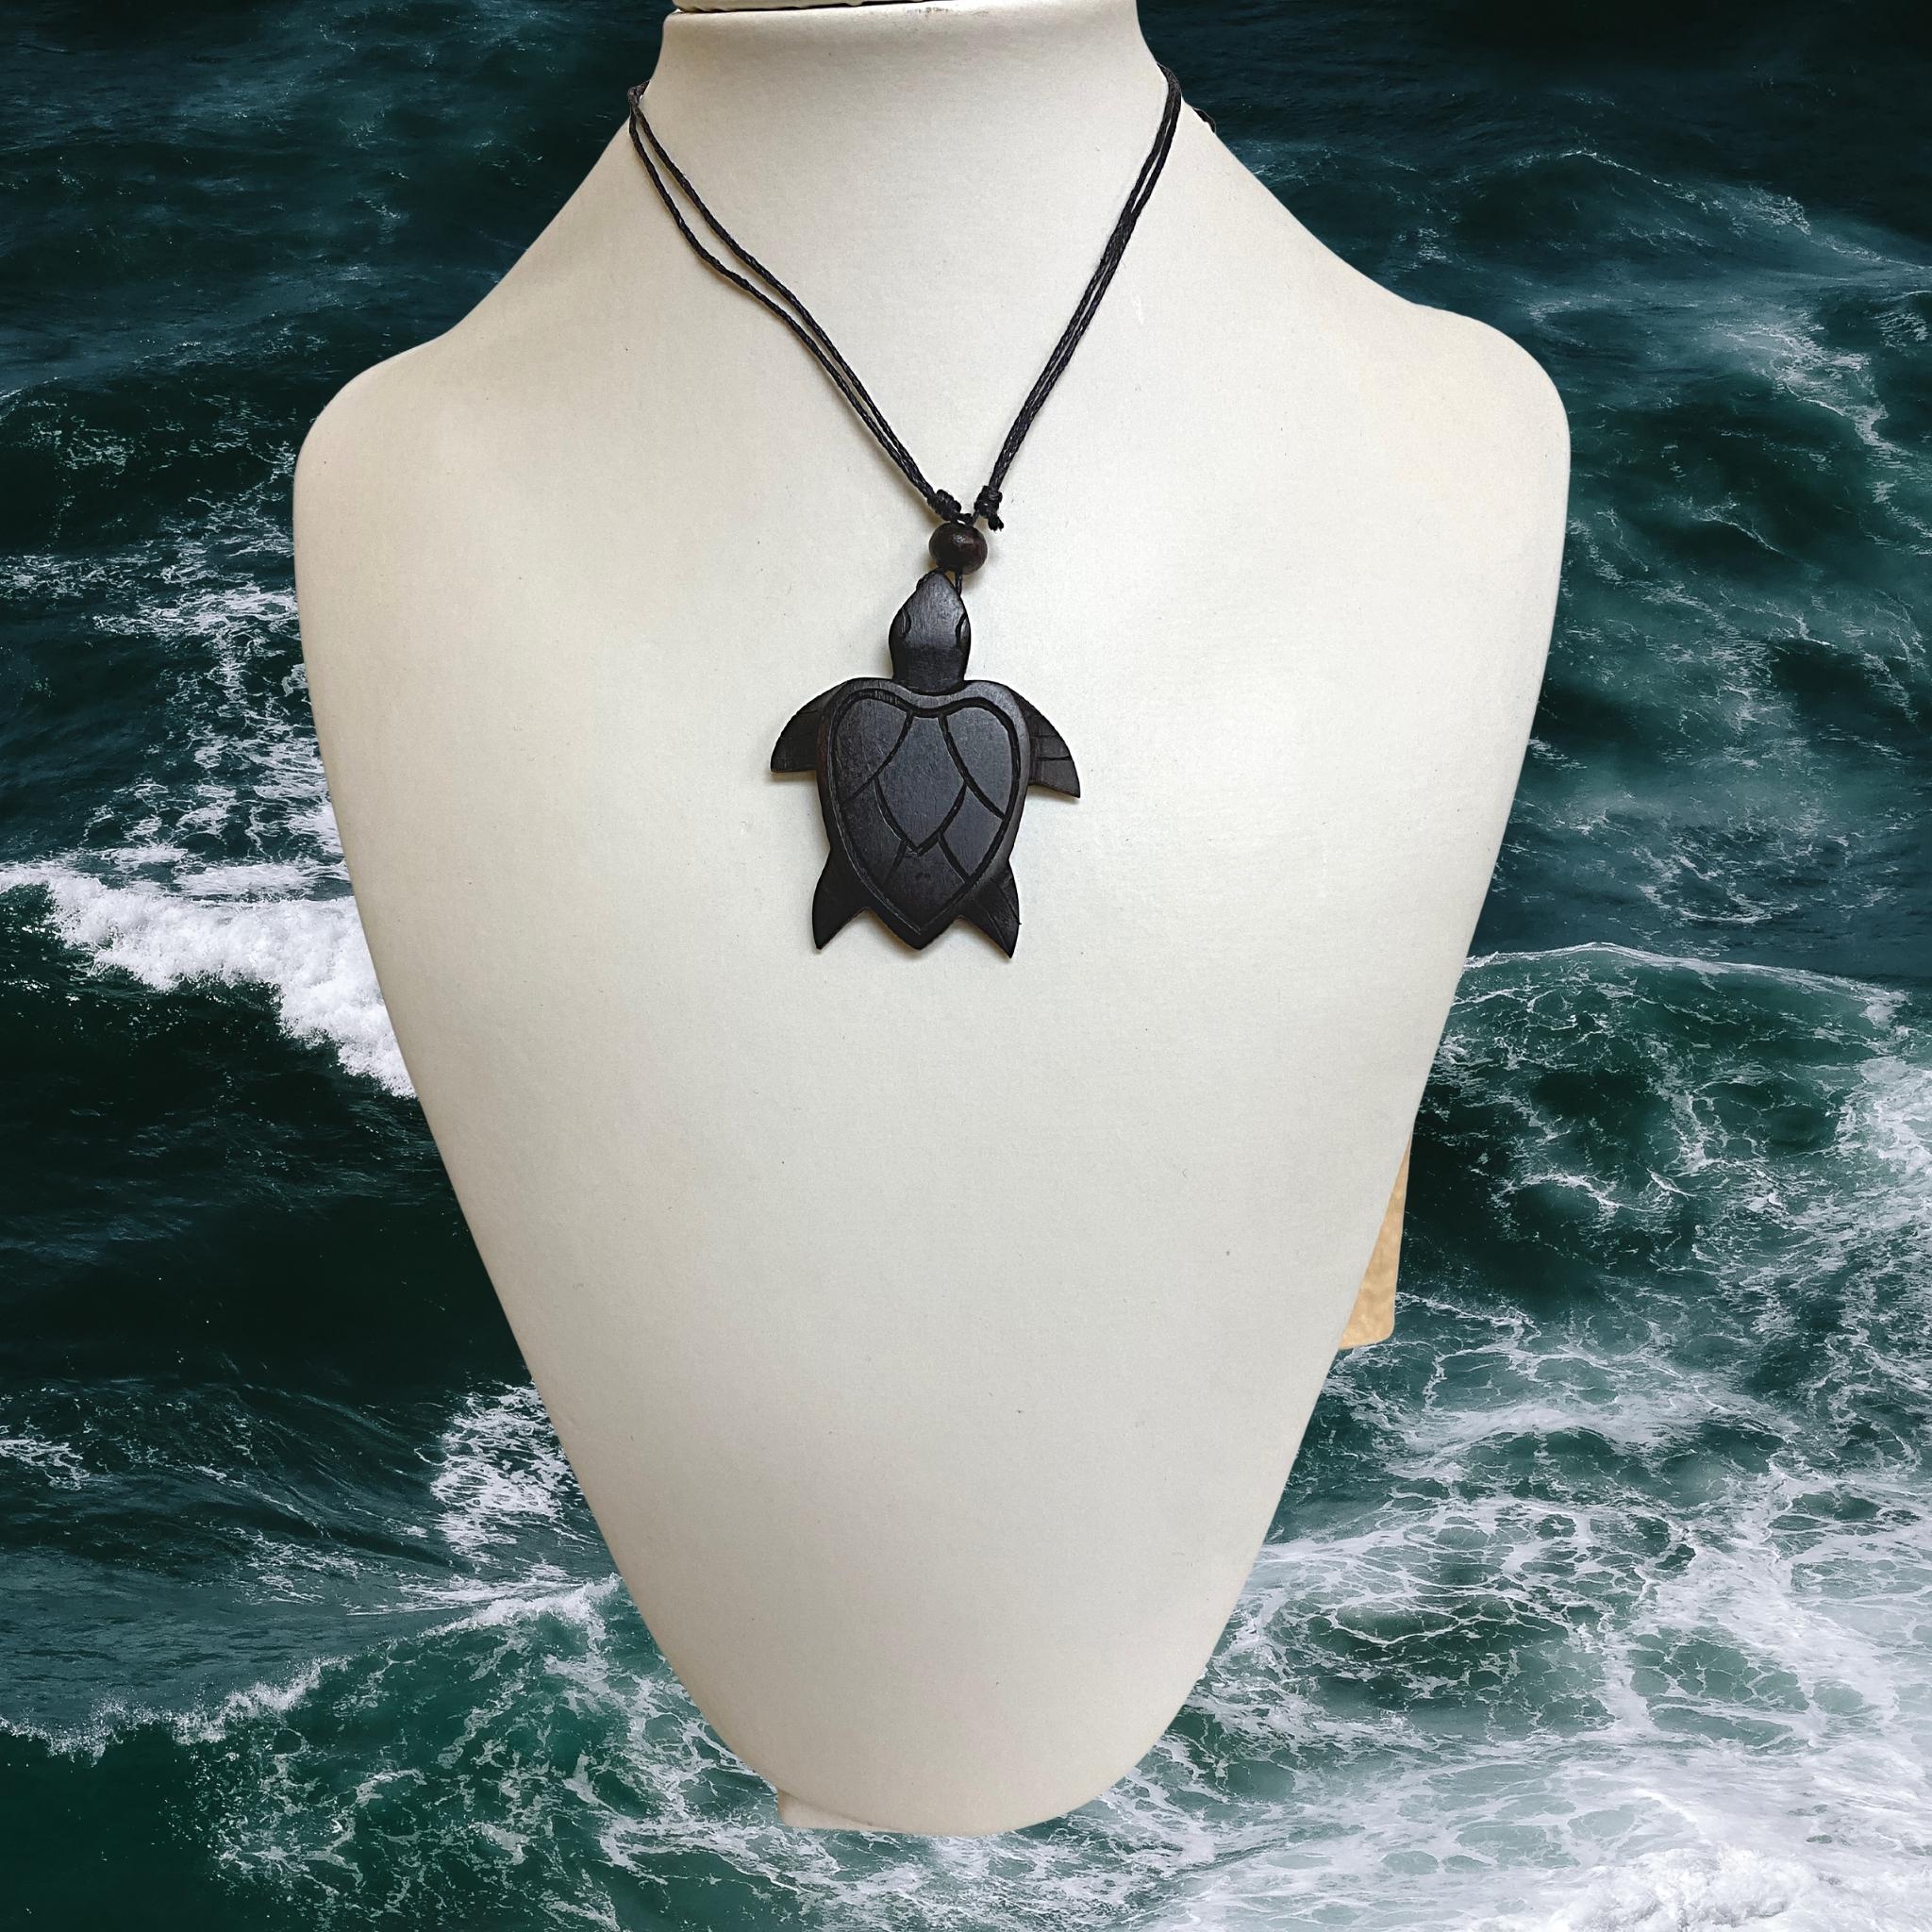 Wooden Carved Fish Necklace hand carved Ironwood Fish pendant Wood Necklace Sea Animal Nautical Wood Jewelry One of a Kind Gift for Him Her - Tobmarc Home Decor & Gifts 